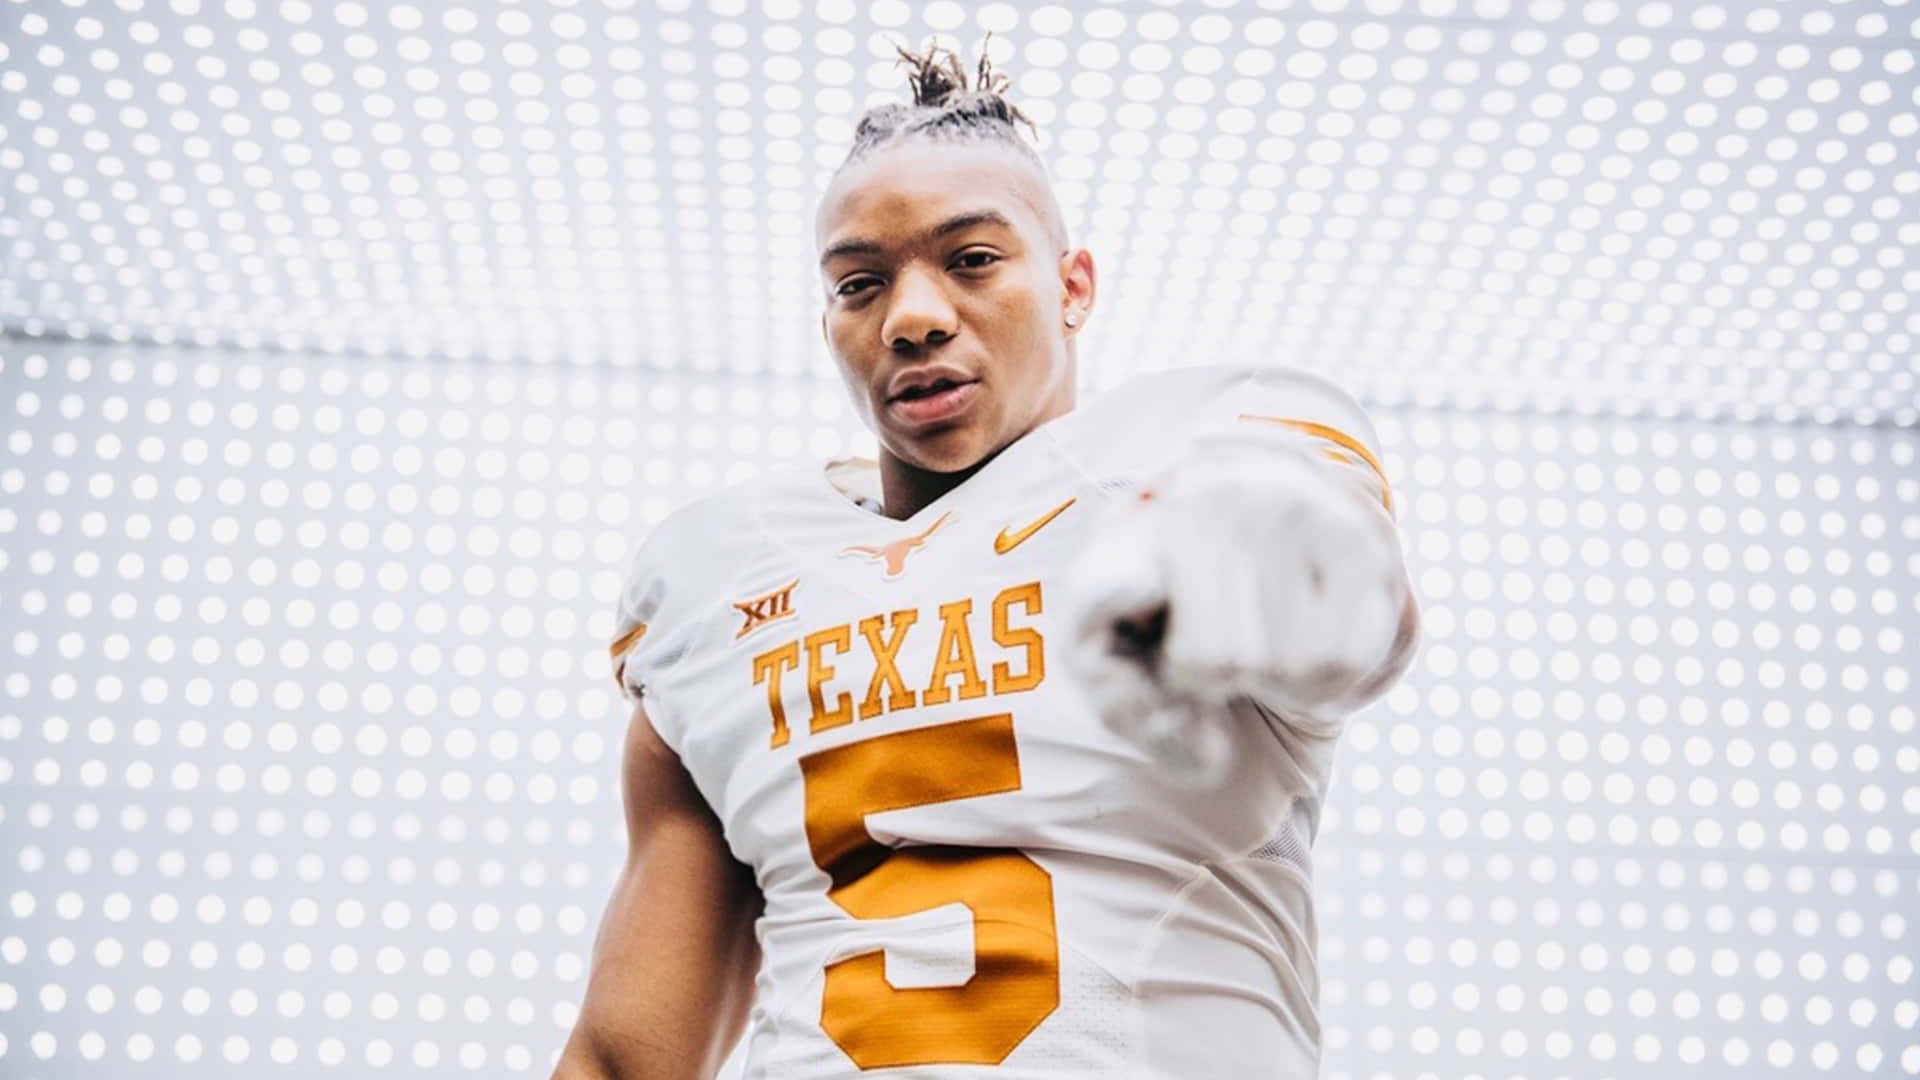 Texas Football Player Pointing Wallpaper